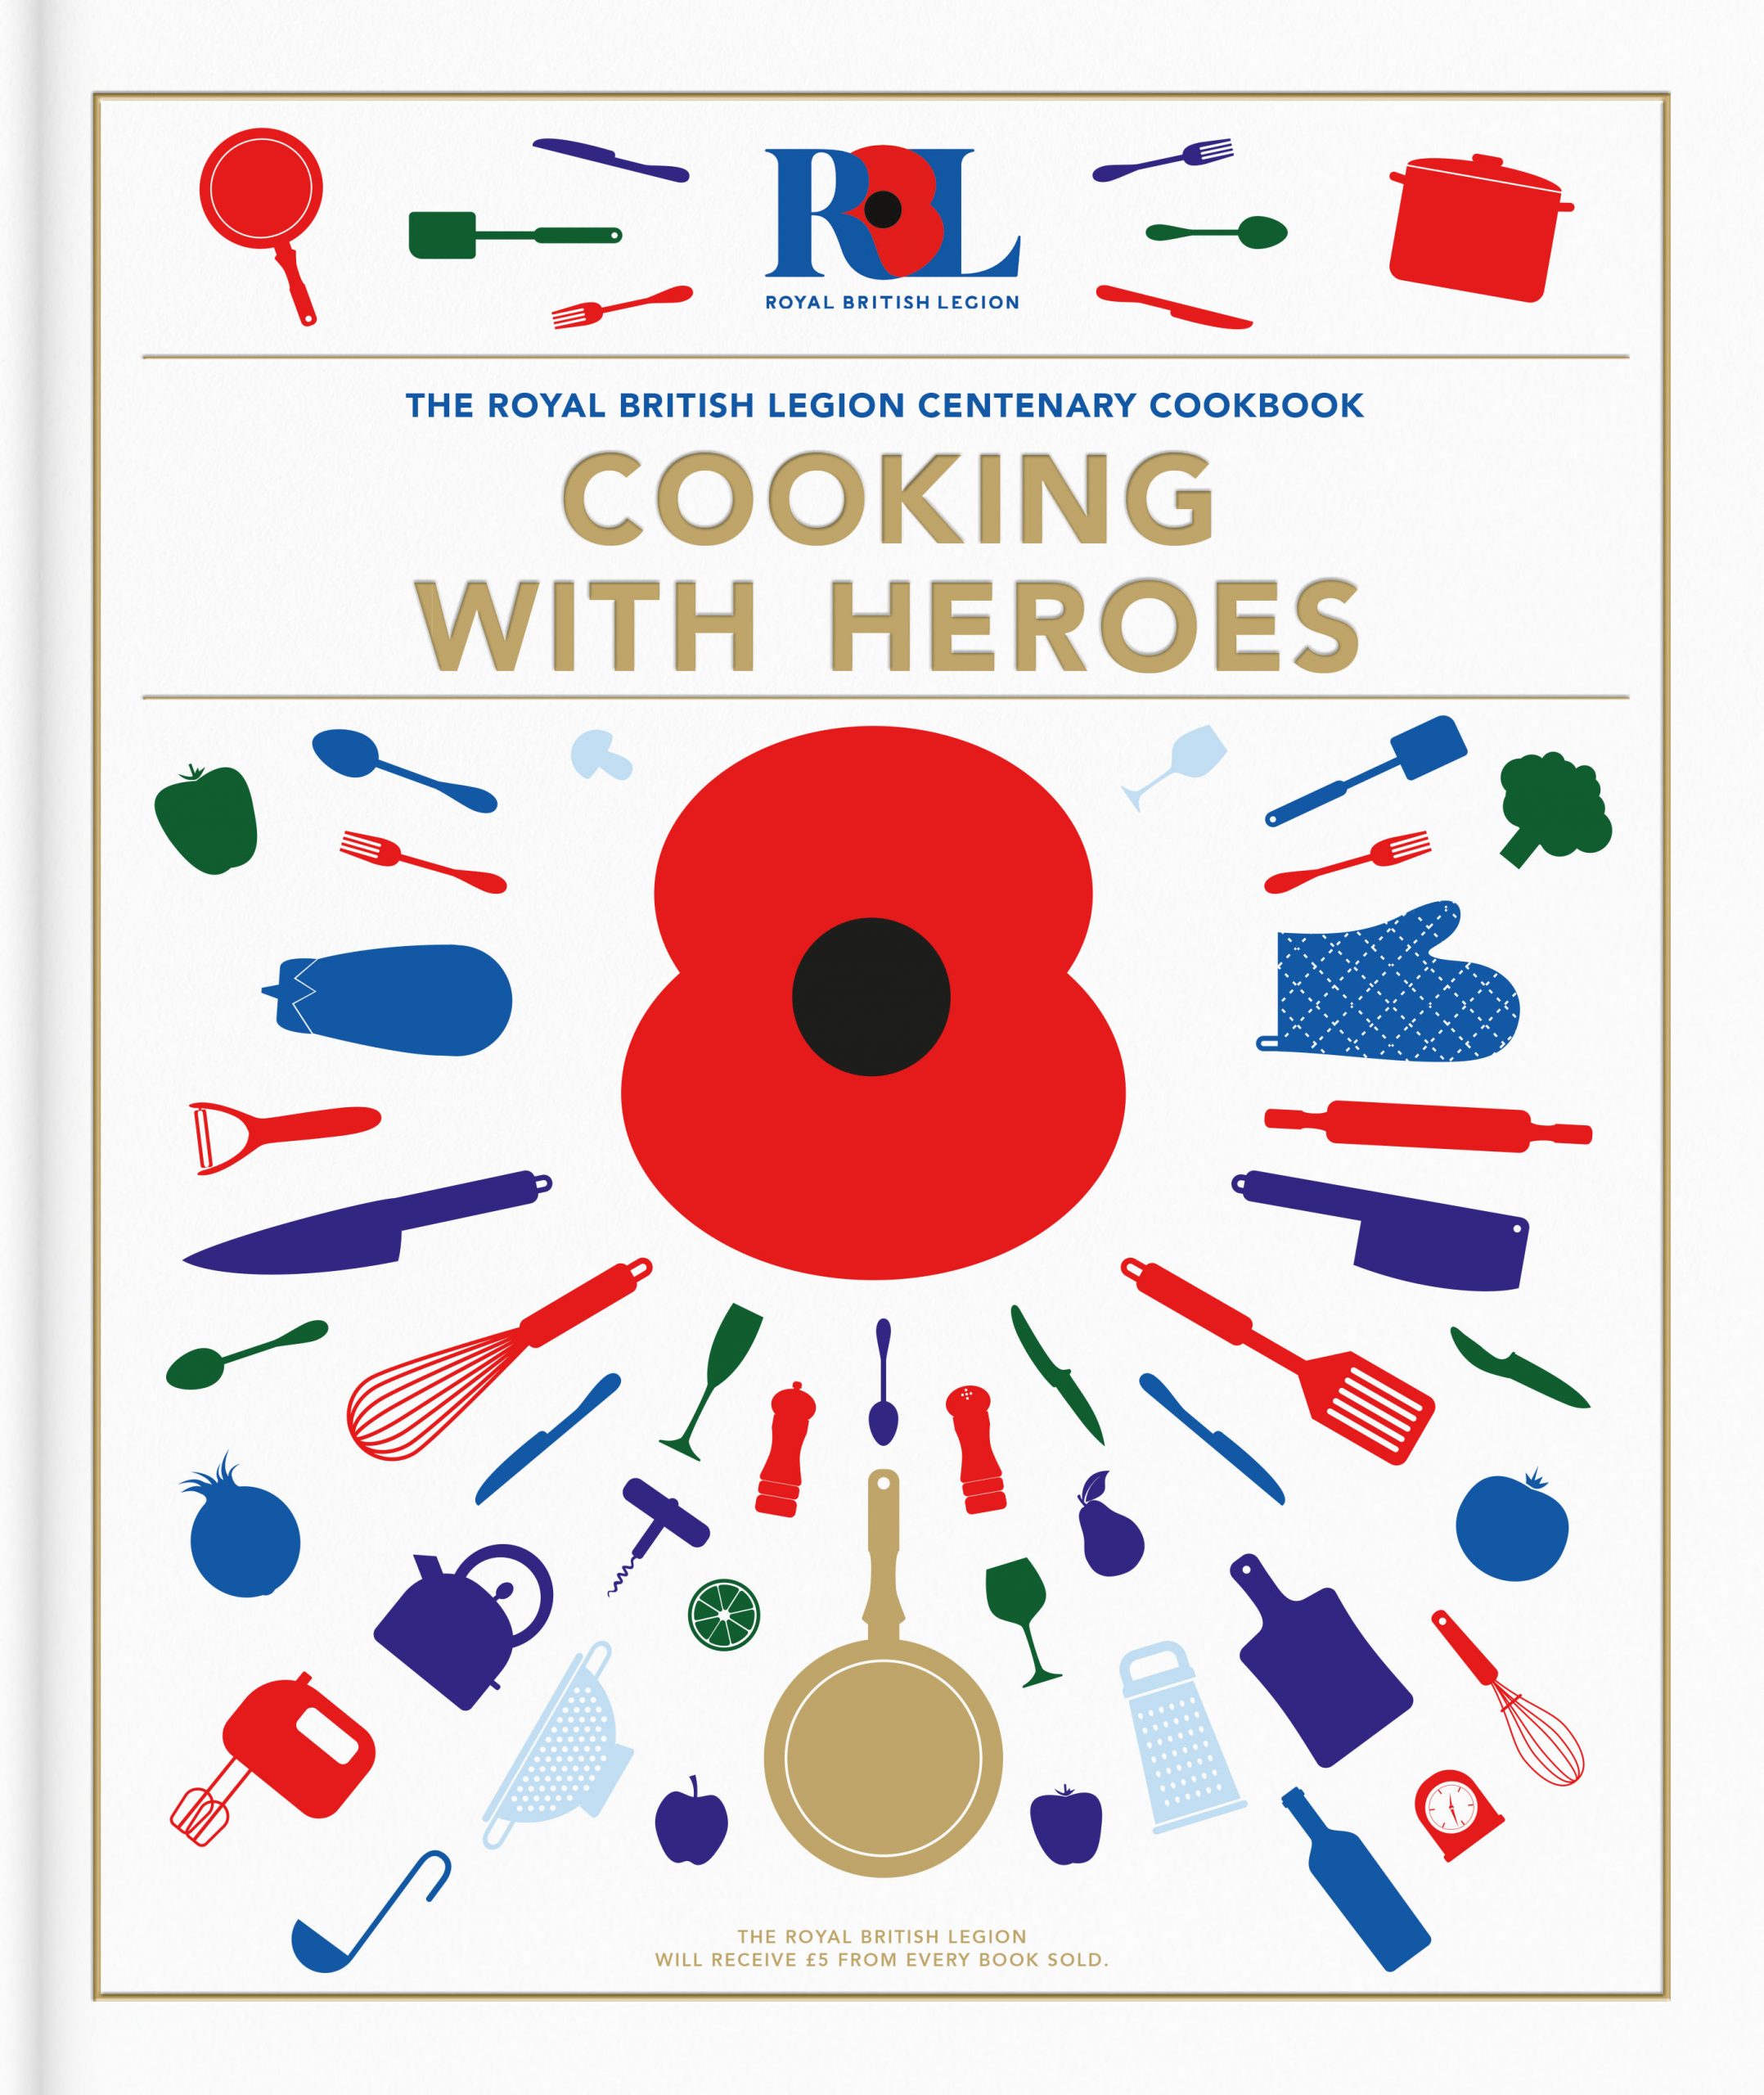 Executive Placement Company Helps Celebrate The Royal British Legion’s Centenary By Backing Cooking With Heroes Cookbook (includes 3 recipes from the cookbook)